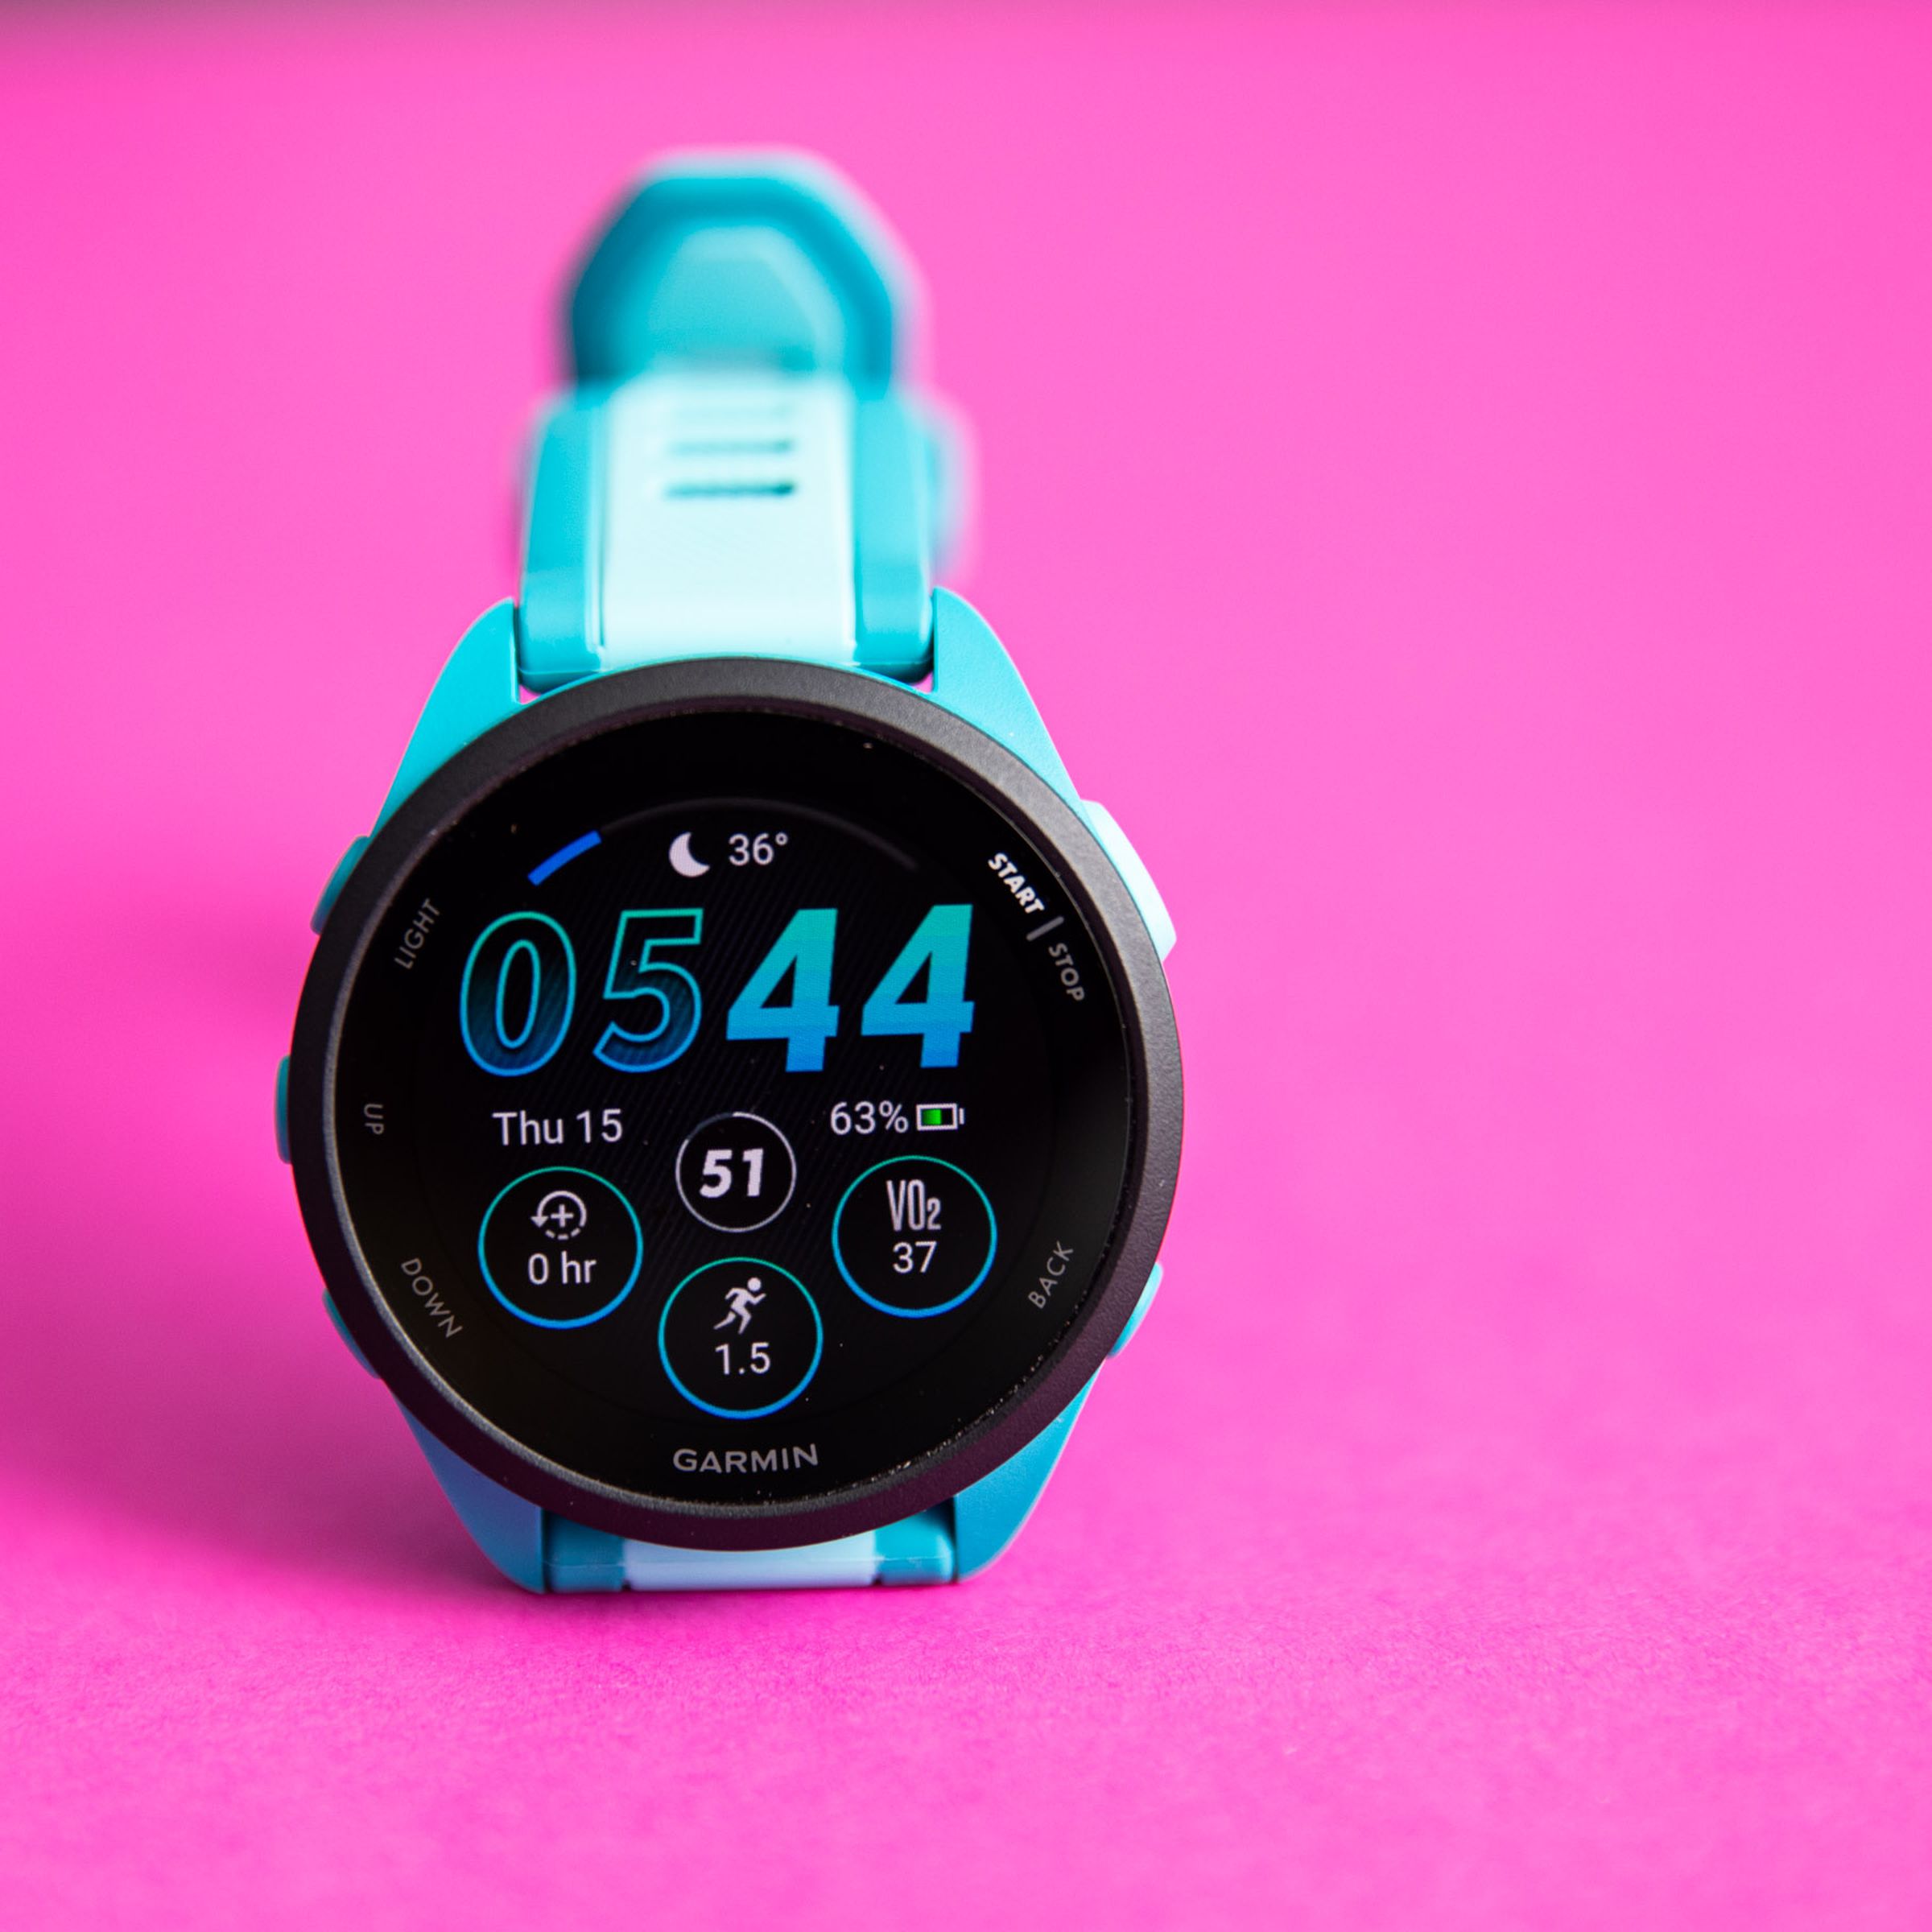 The Forerunner 165 series is the budget training watch Garmin needed